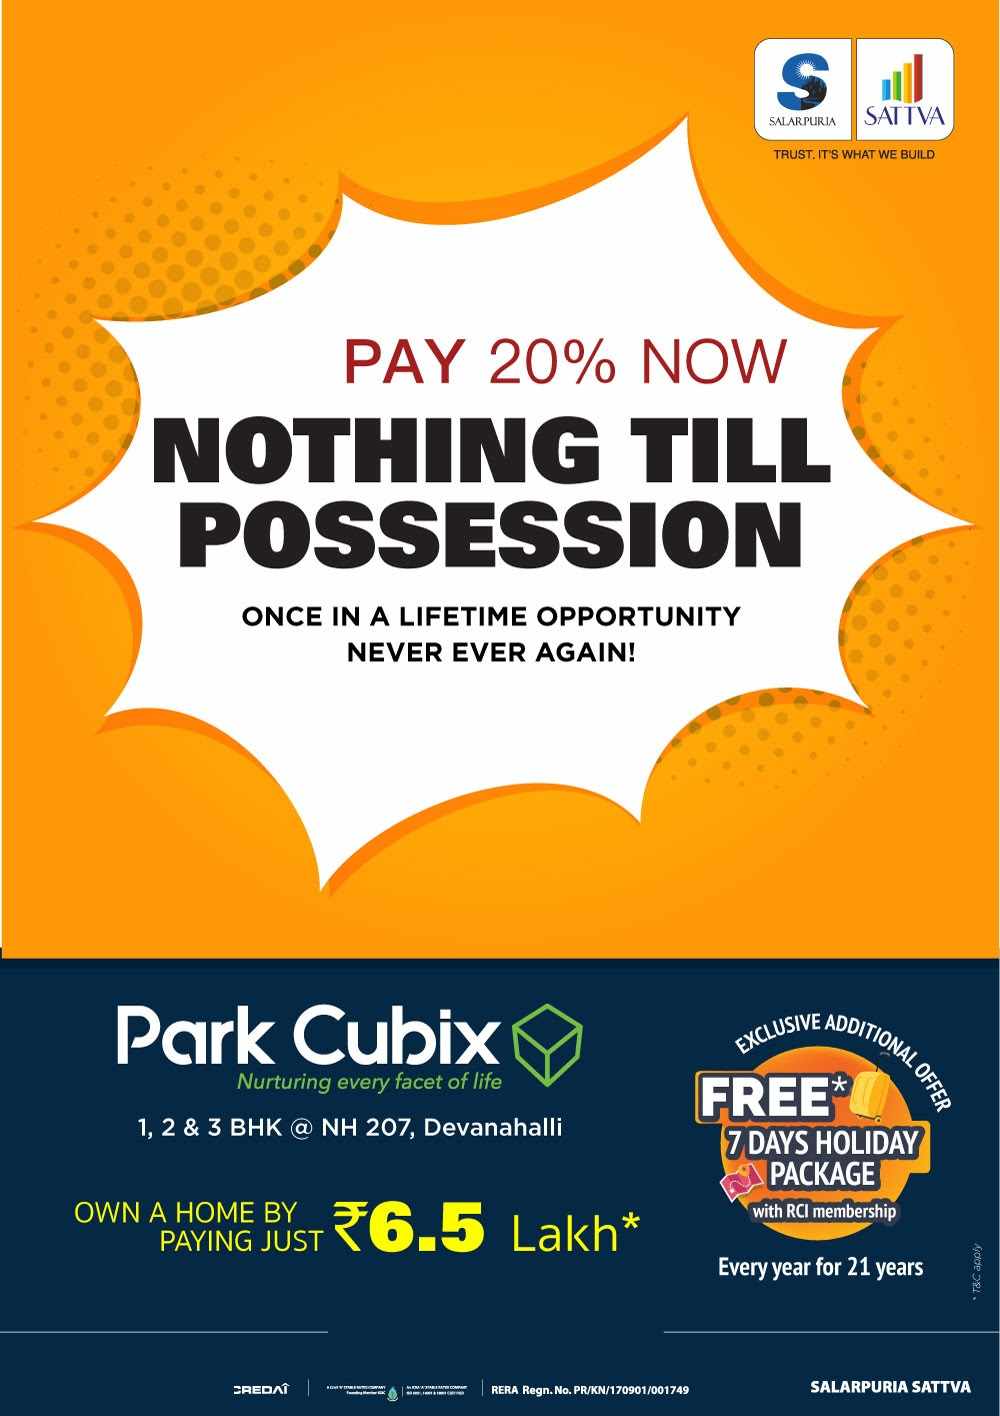 Pay just Rs. 6.5 Lakh and own a home at Salarpuria Sattva Park Cubix in Bangalore